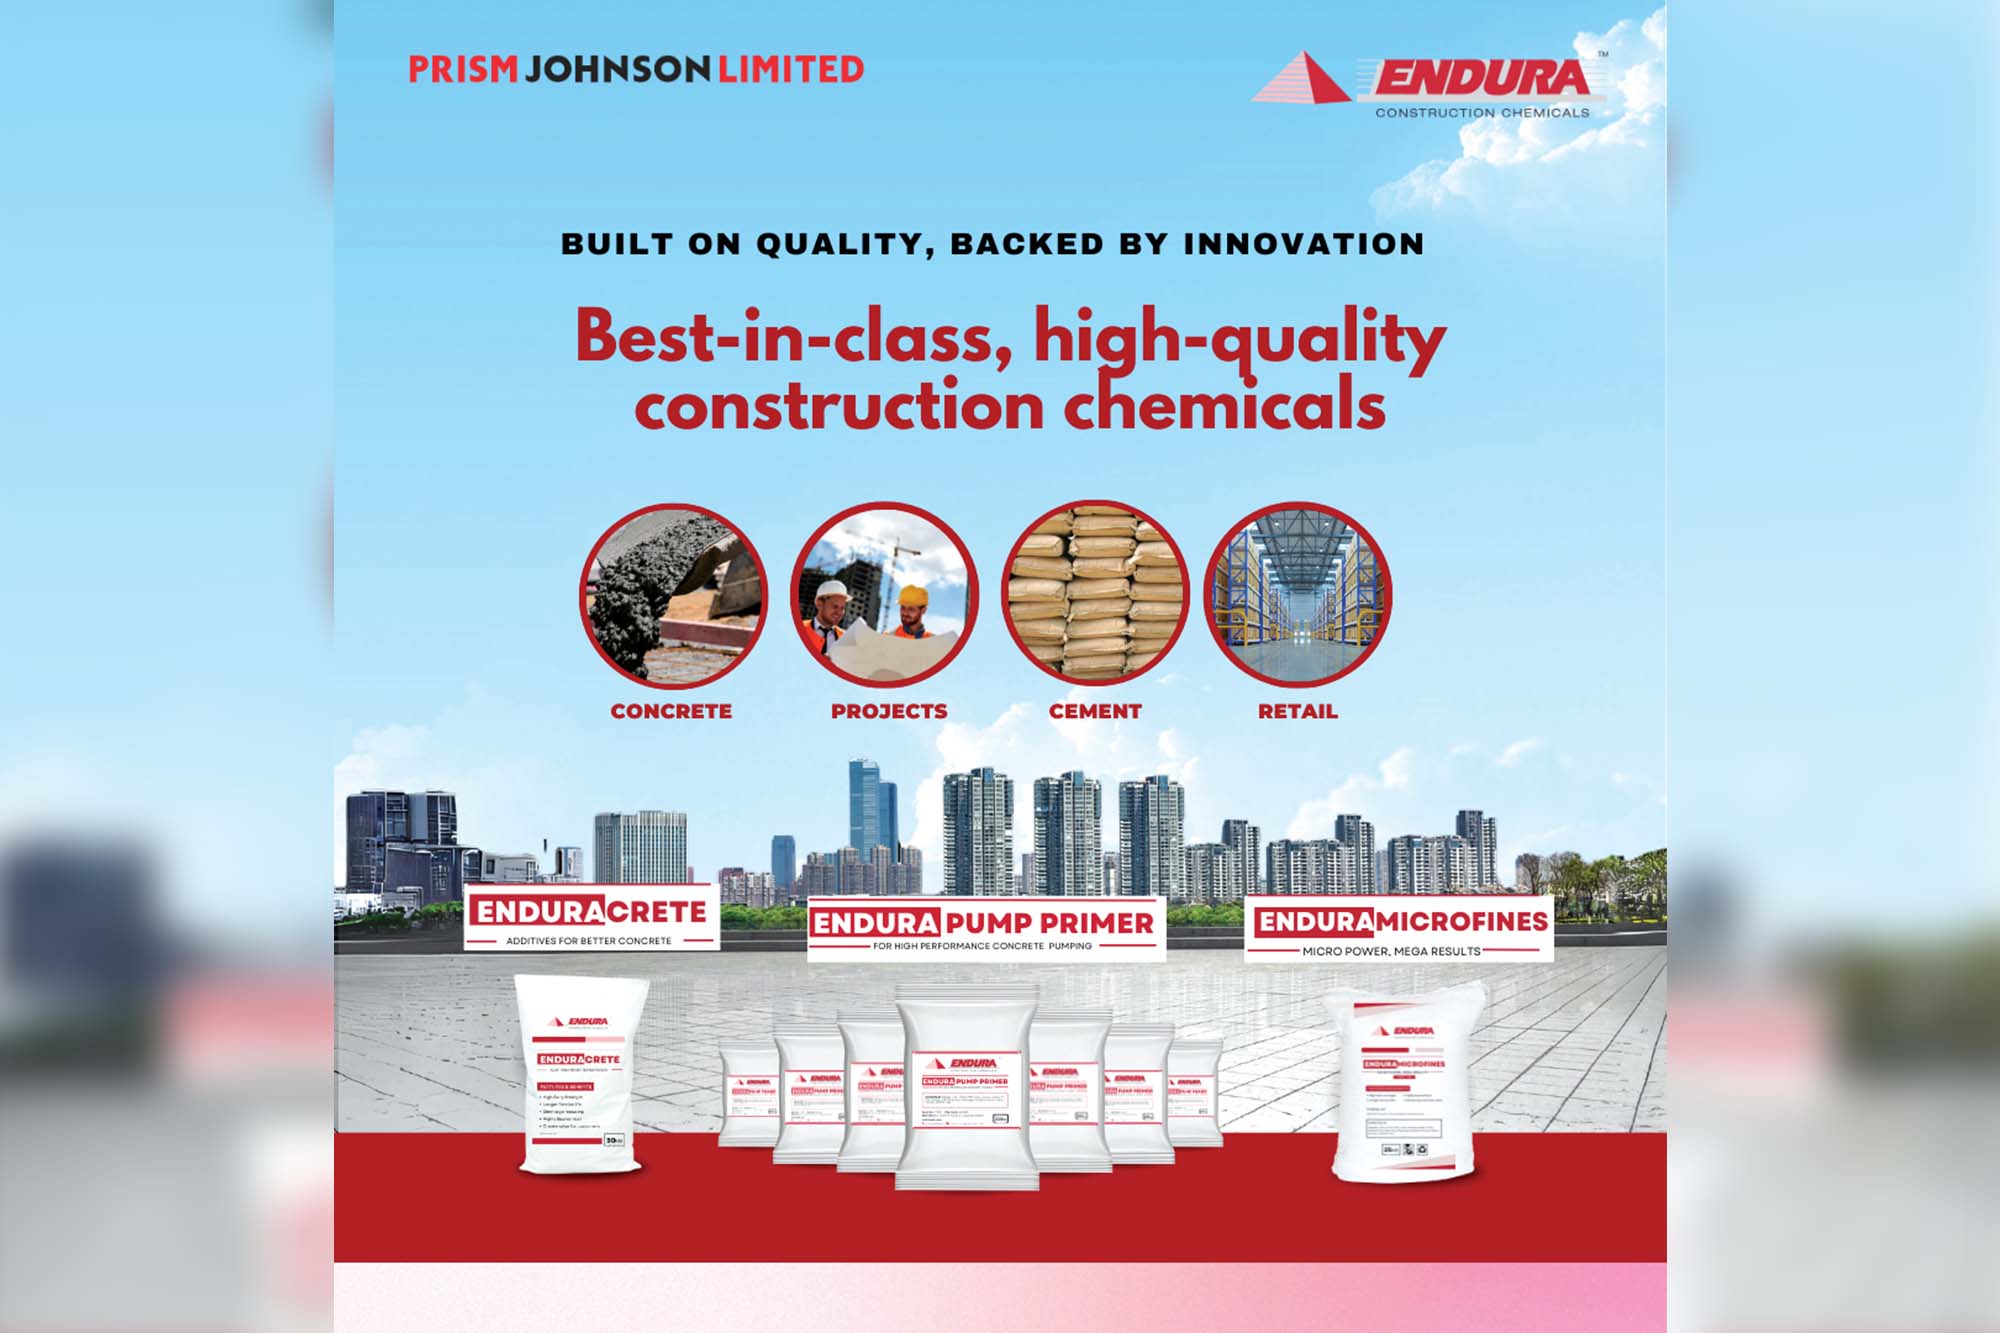 Endura construction chemicals, built on quality, backed by innovation